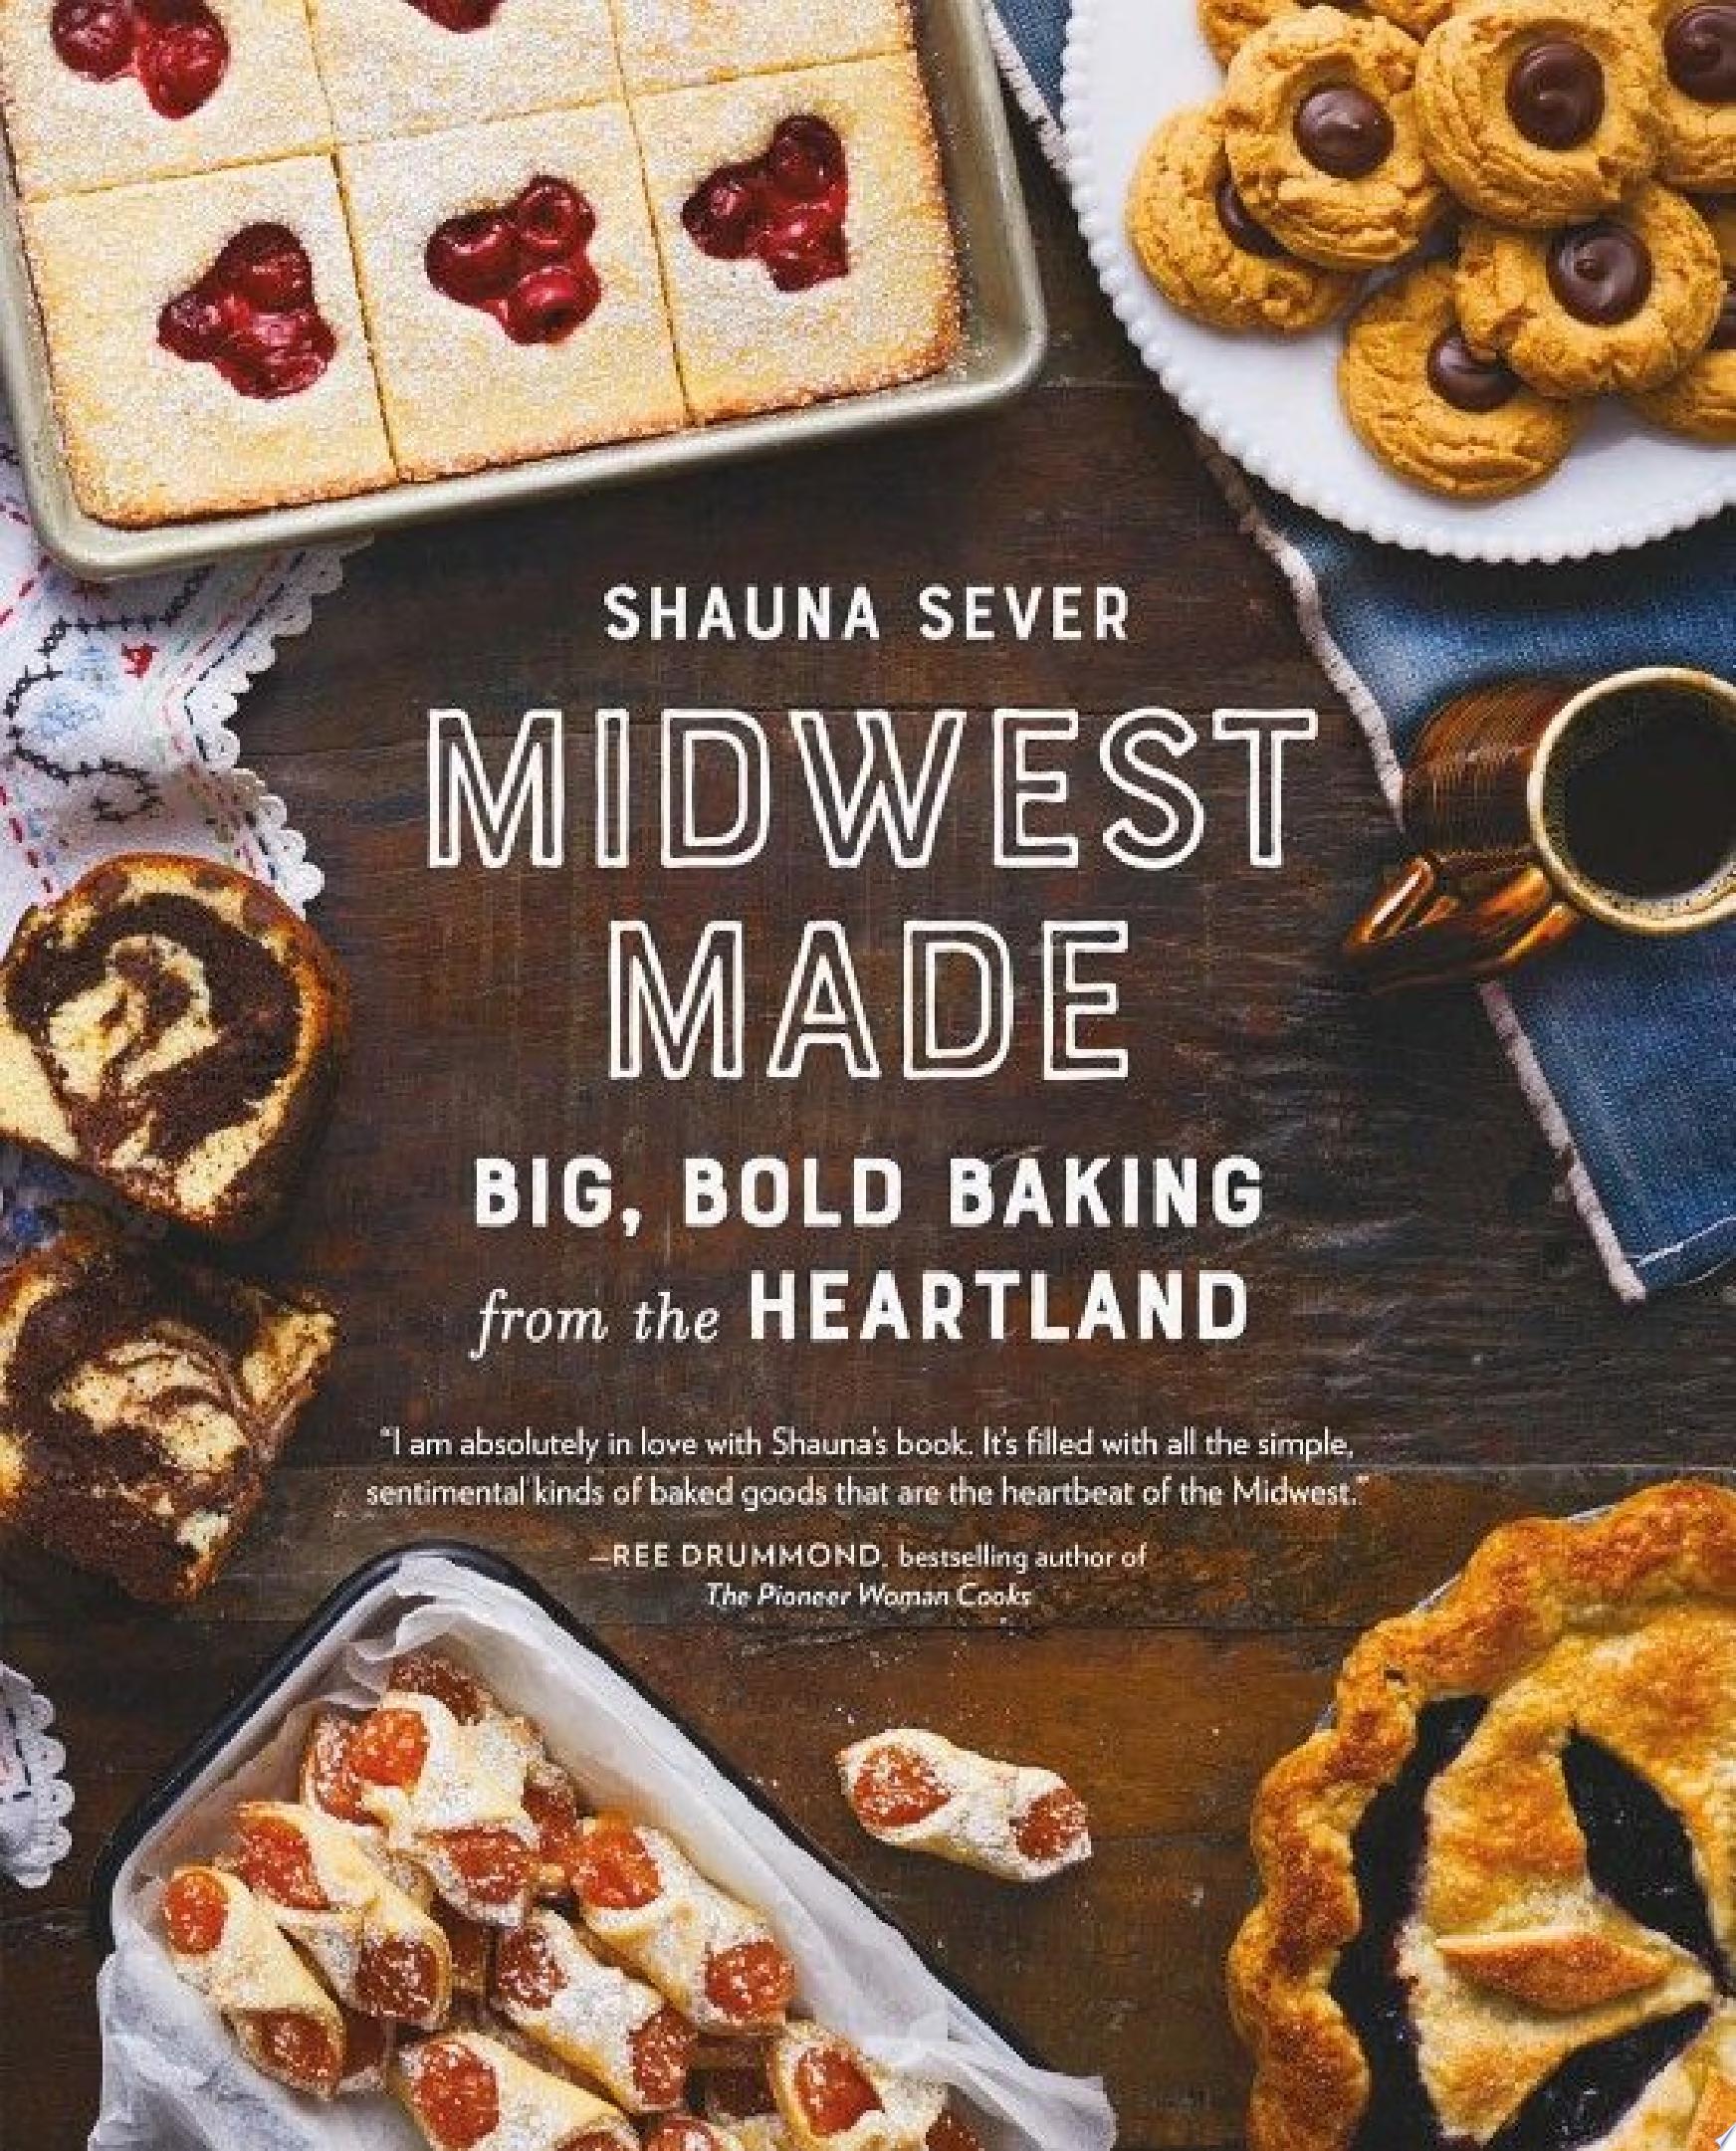 Image for "Midwest Made"